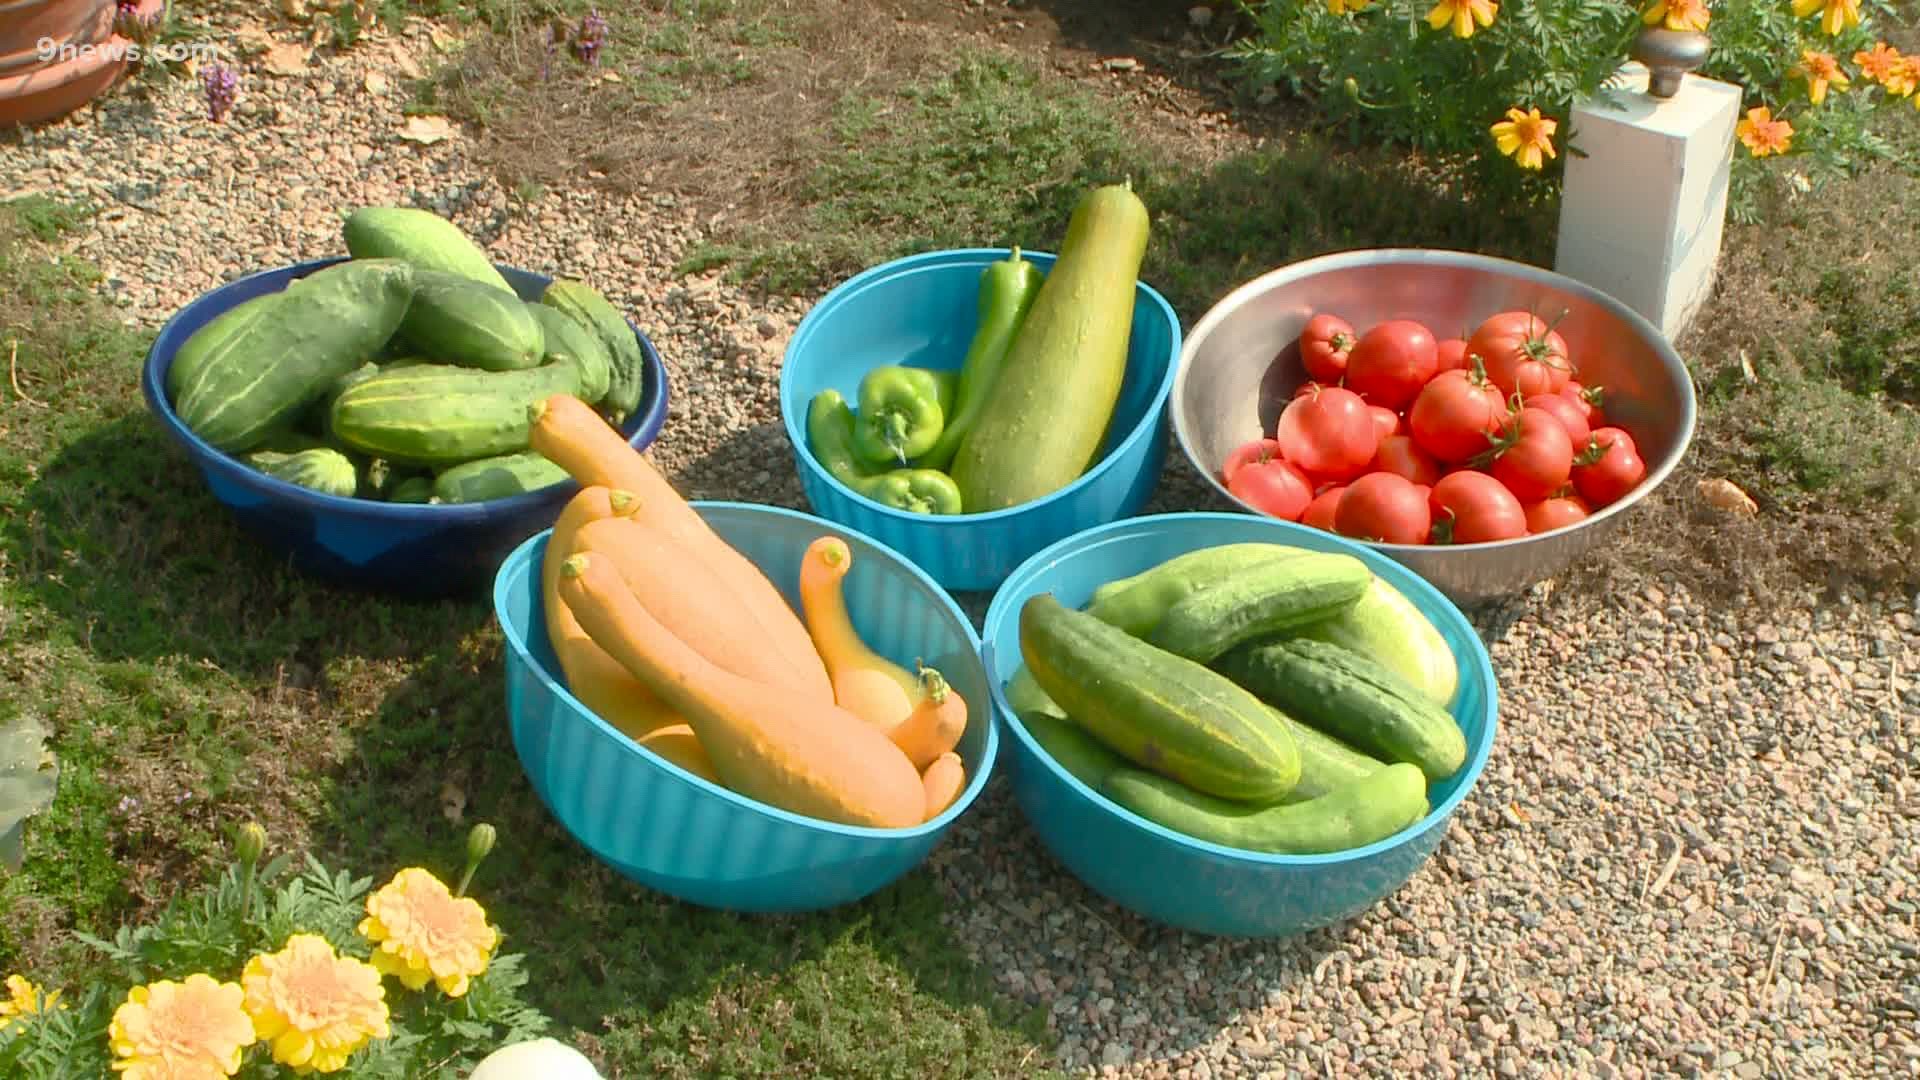 Cucumbers, squash, beans, peppers and tomatoes should be in high gear. If you stop picking, they'll stop producing.